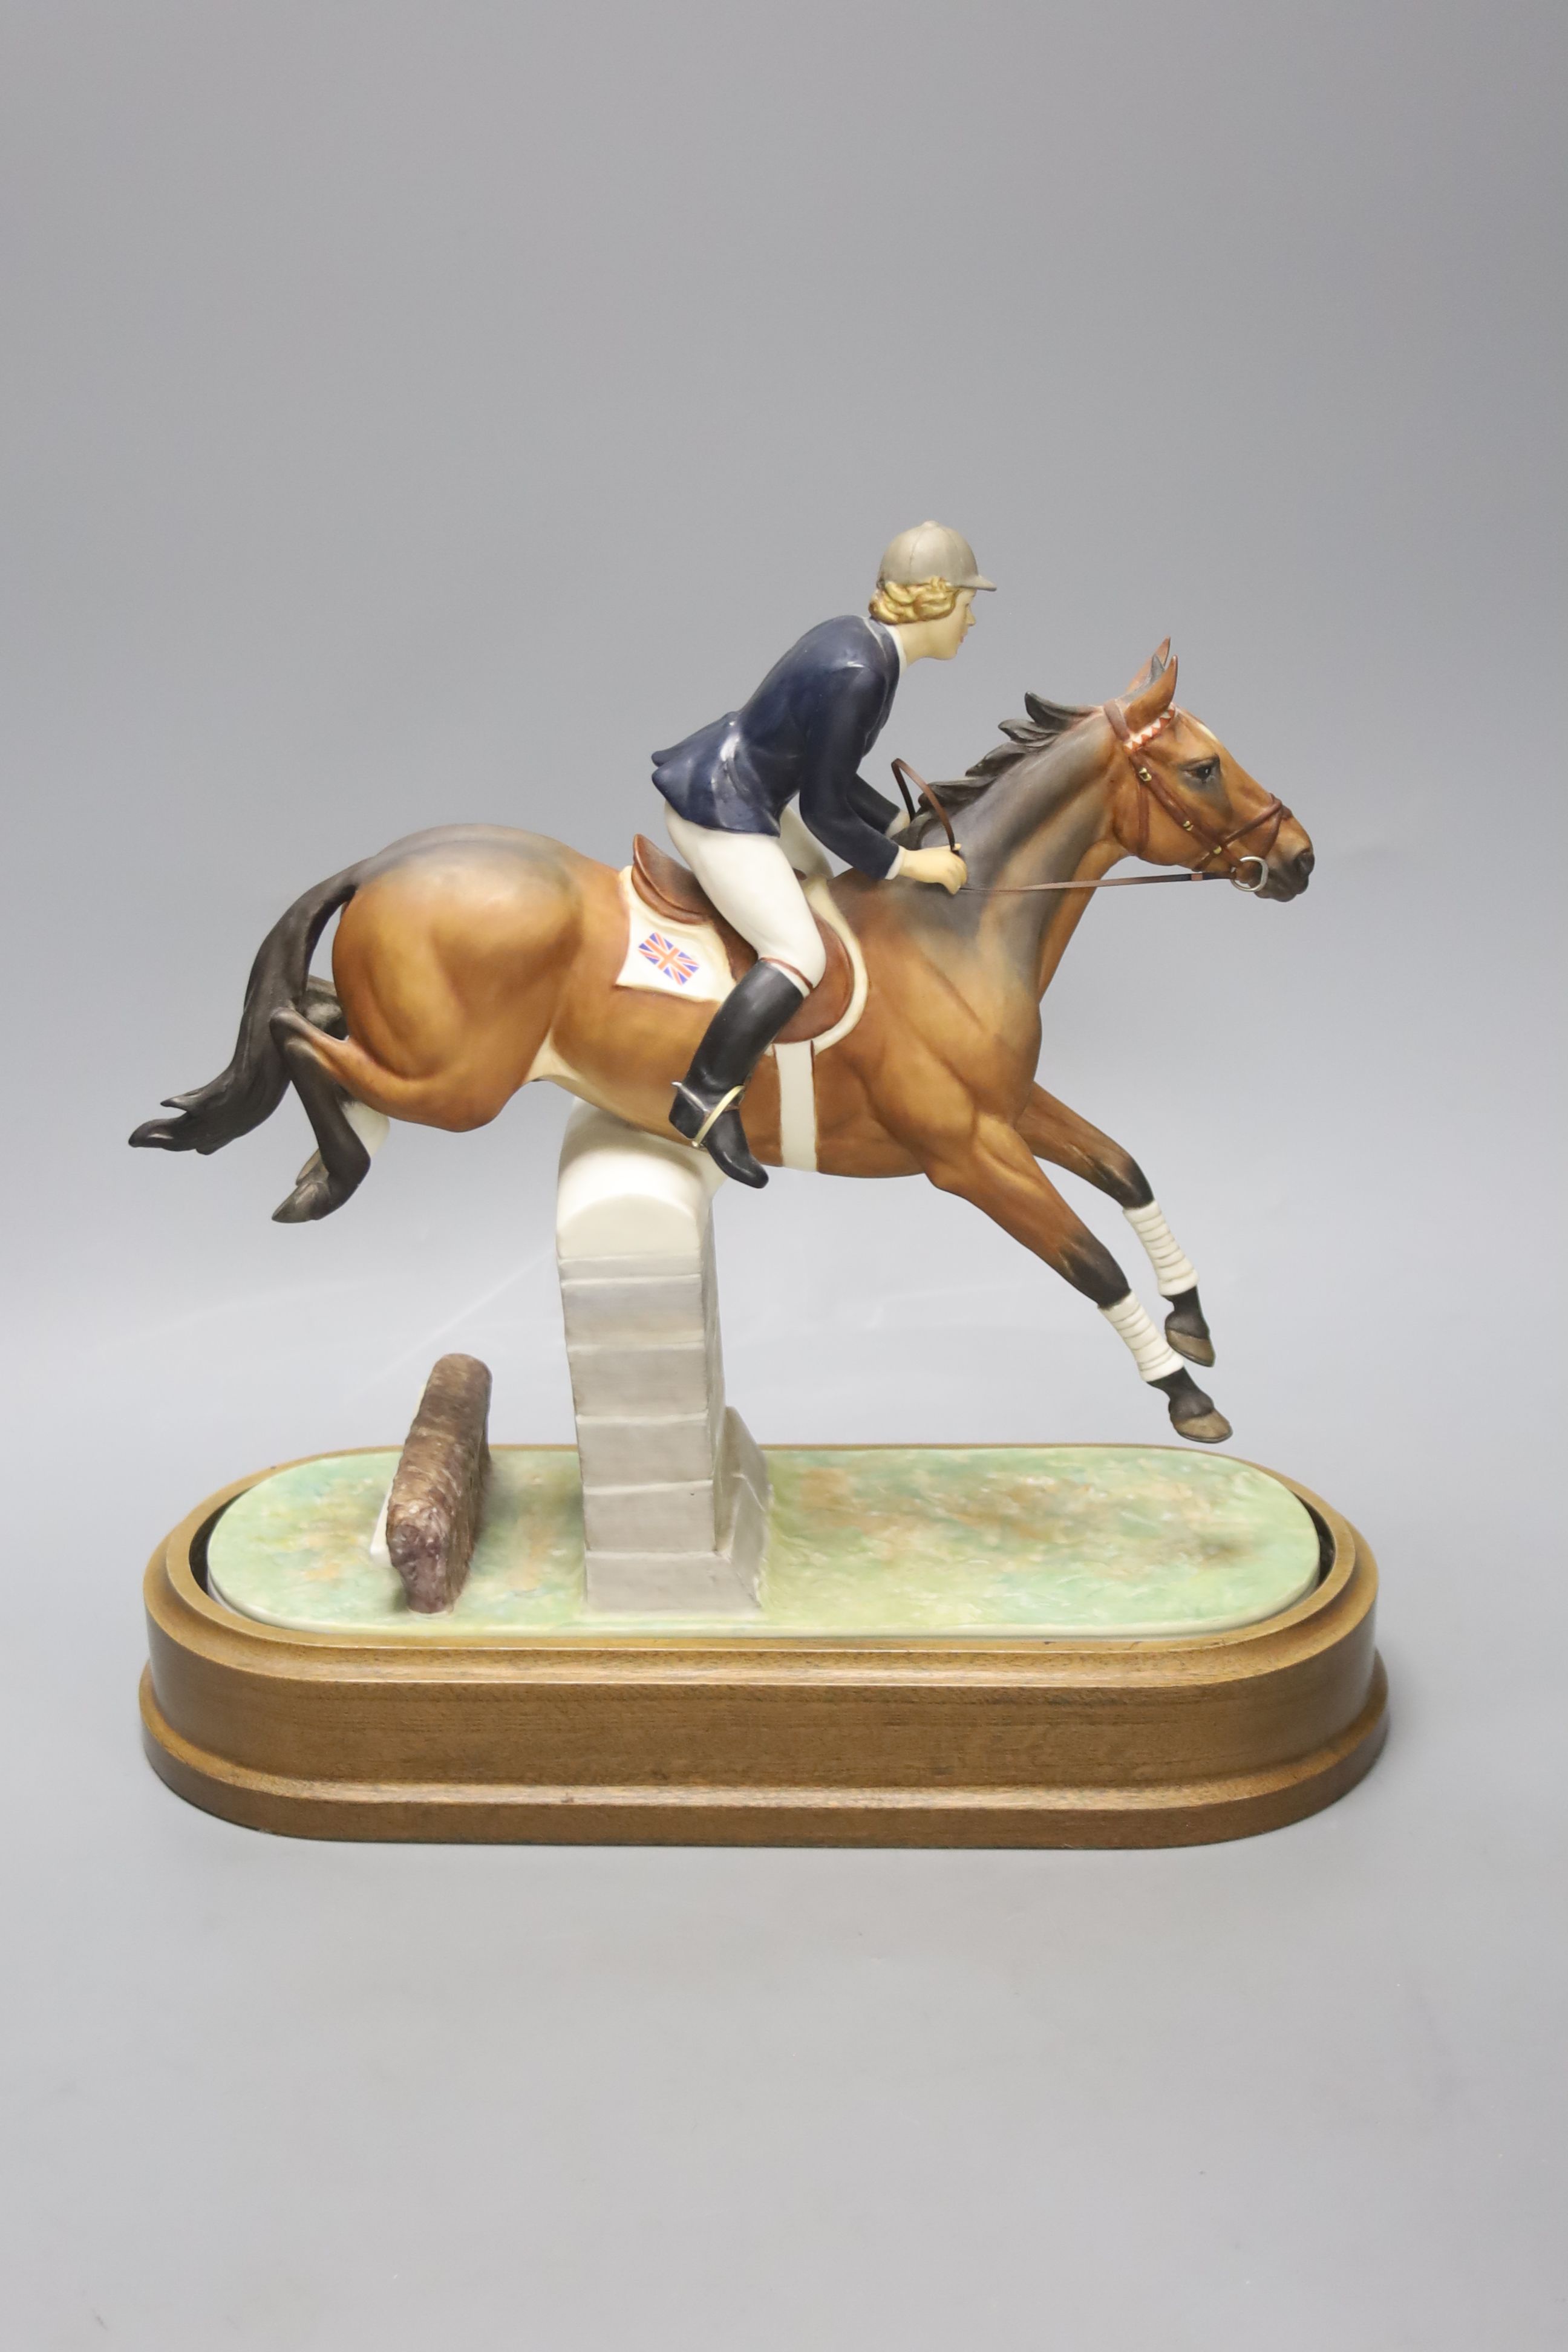 Doris Lindner for Royal Worcester, a limited edition figure, 'Marion Coakes on Stroller', no. 524/750, circa 1970, on wooden plinth, with certificate